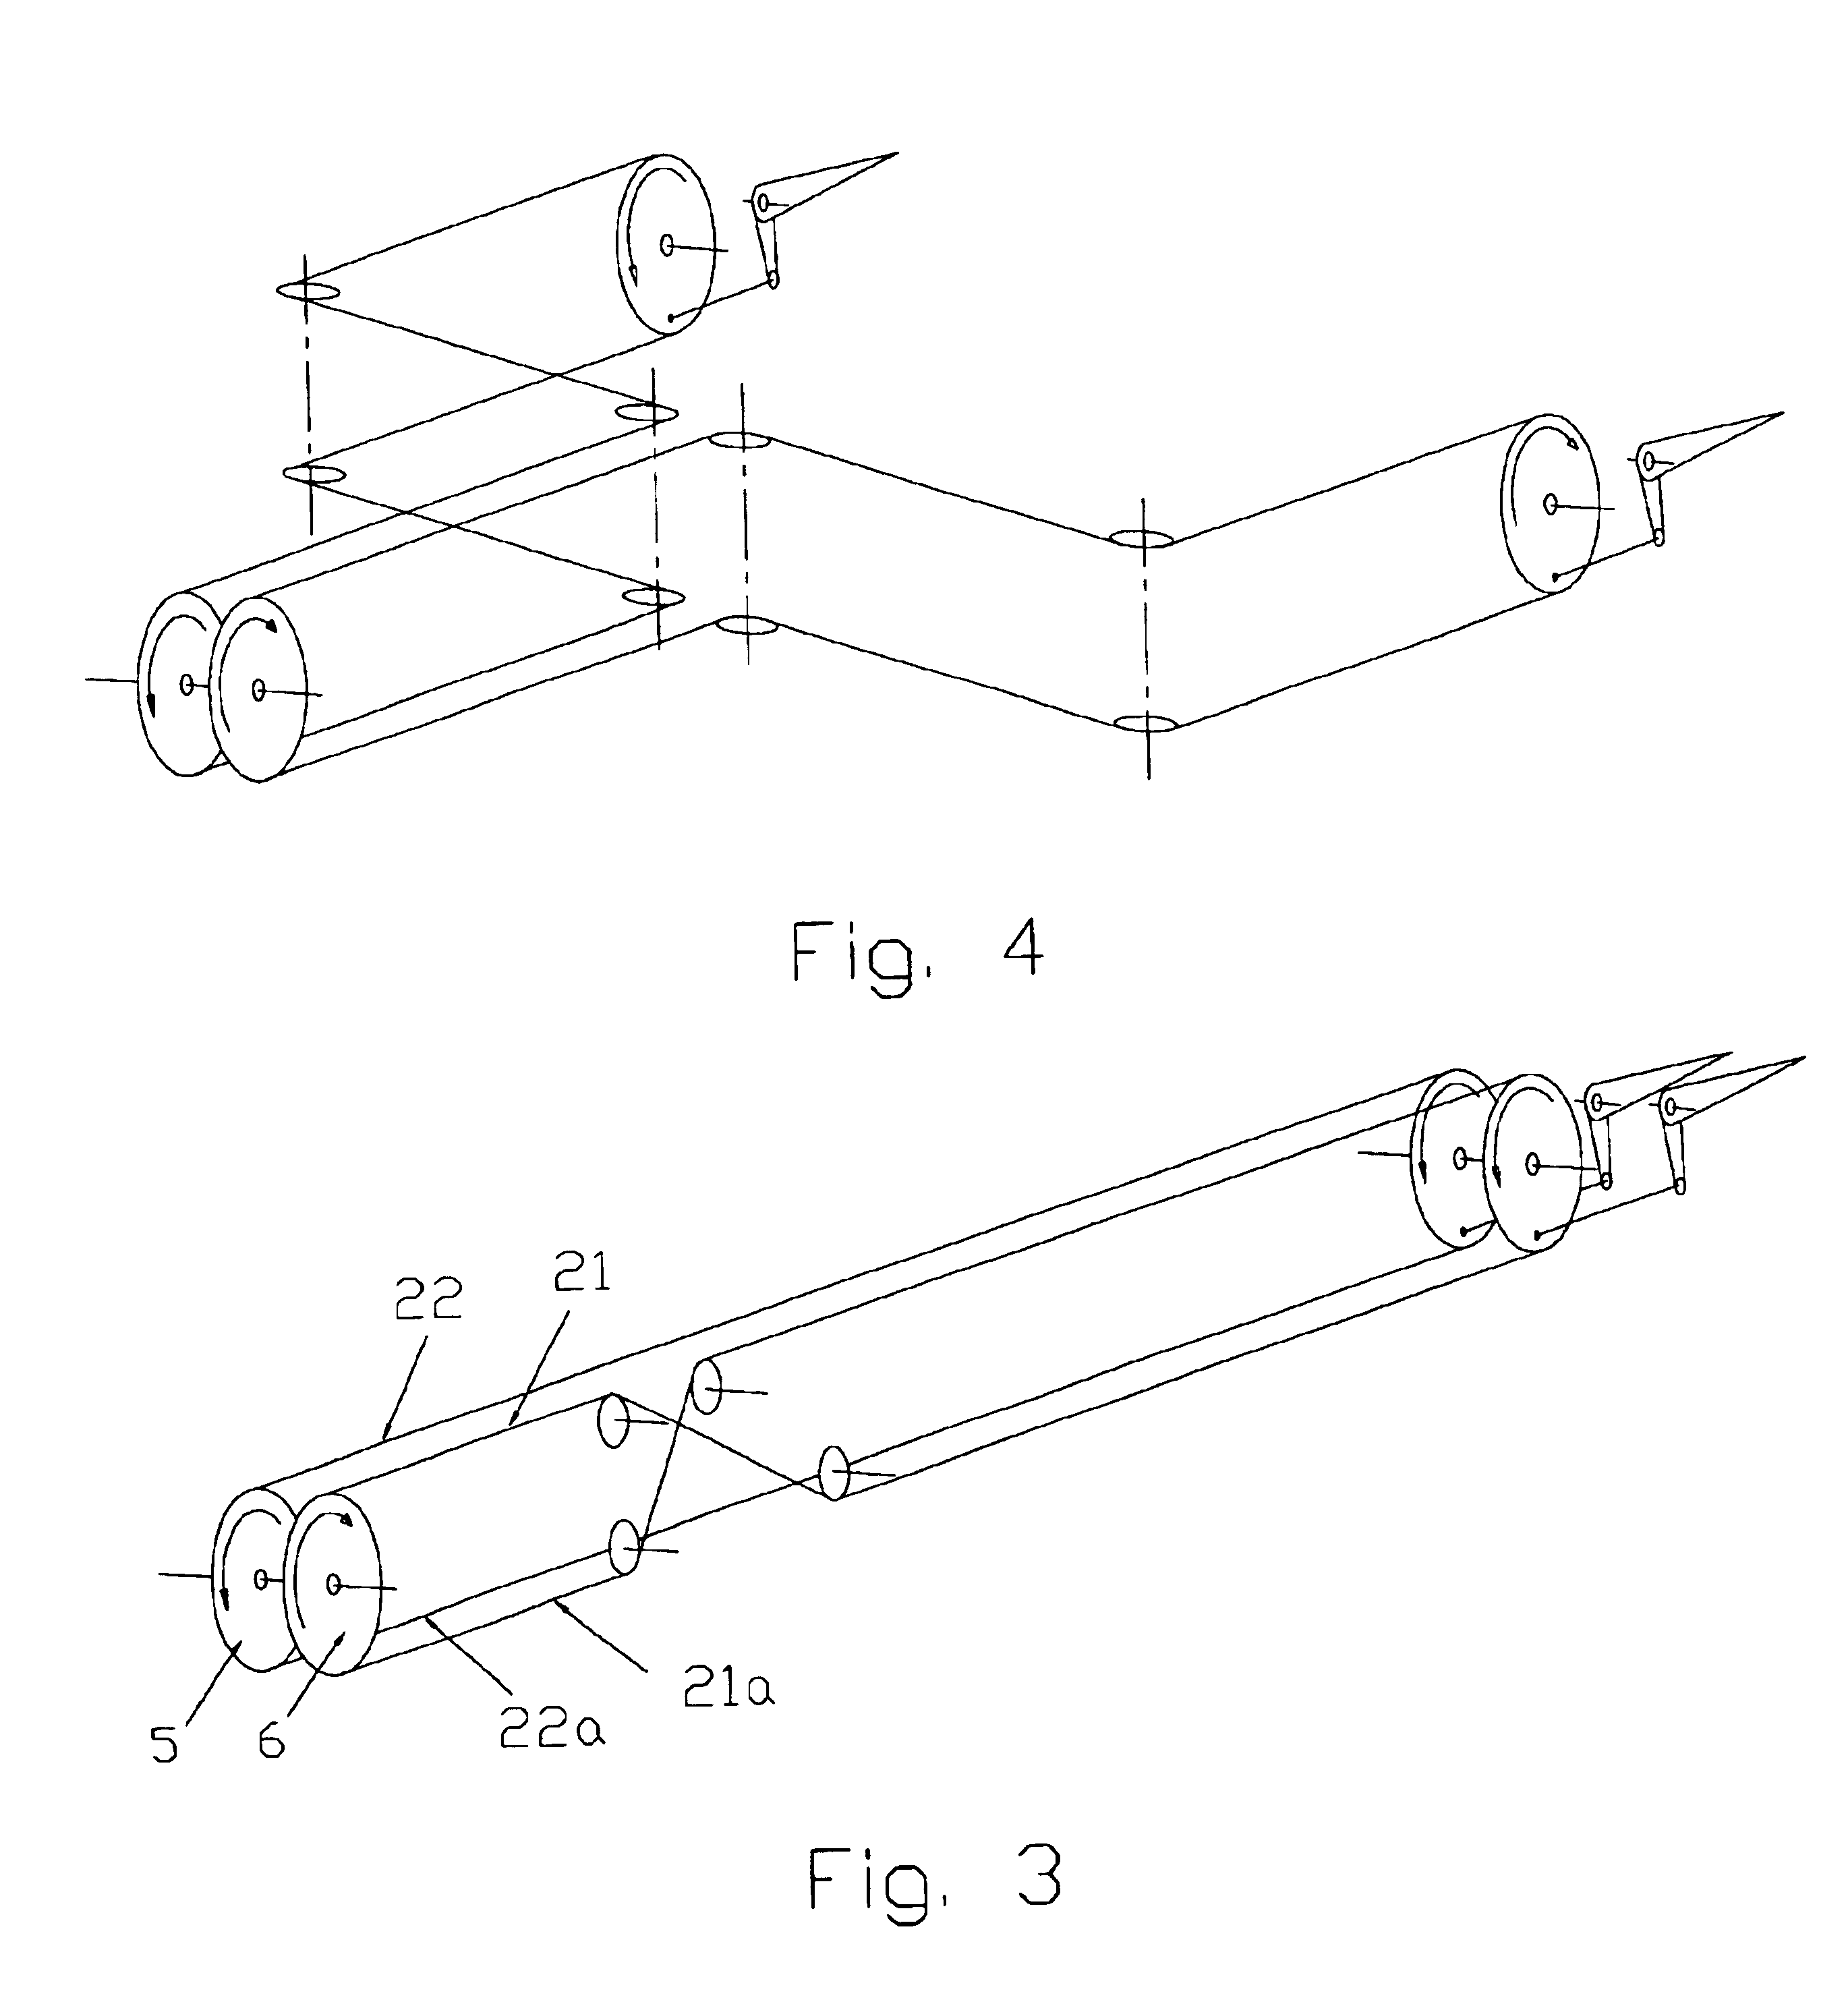 Non-jamming, fail safe flight control system with non-symmetric load alleviation capability